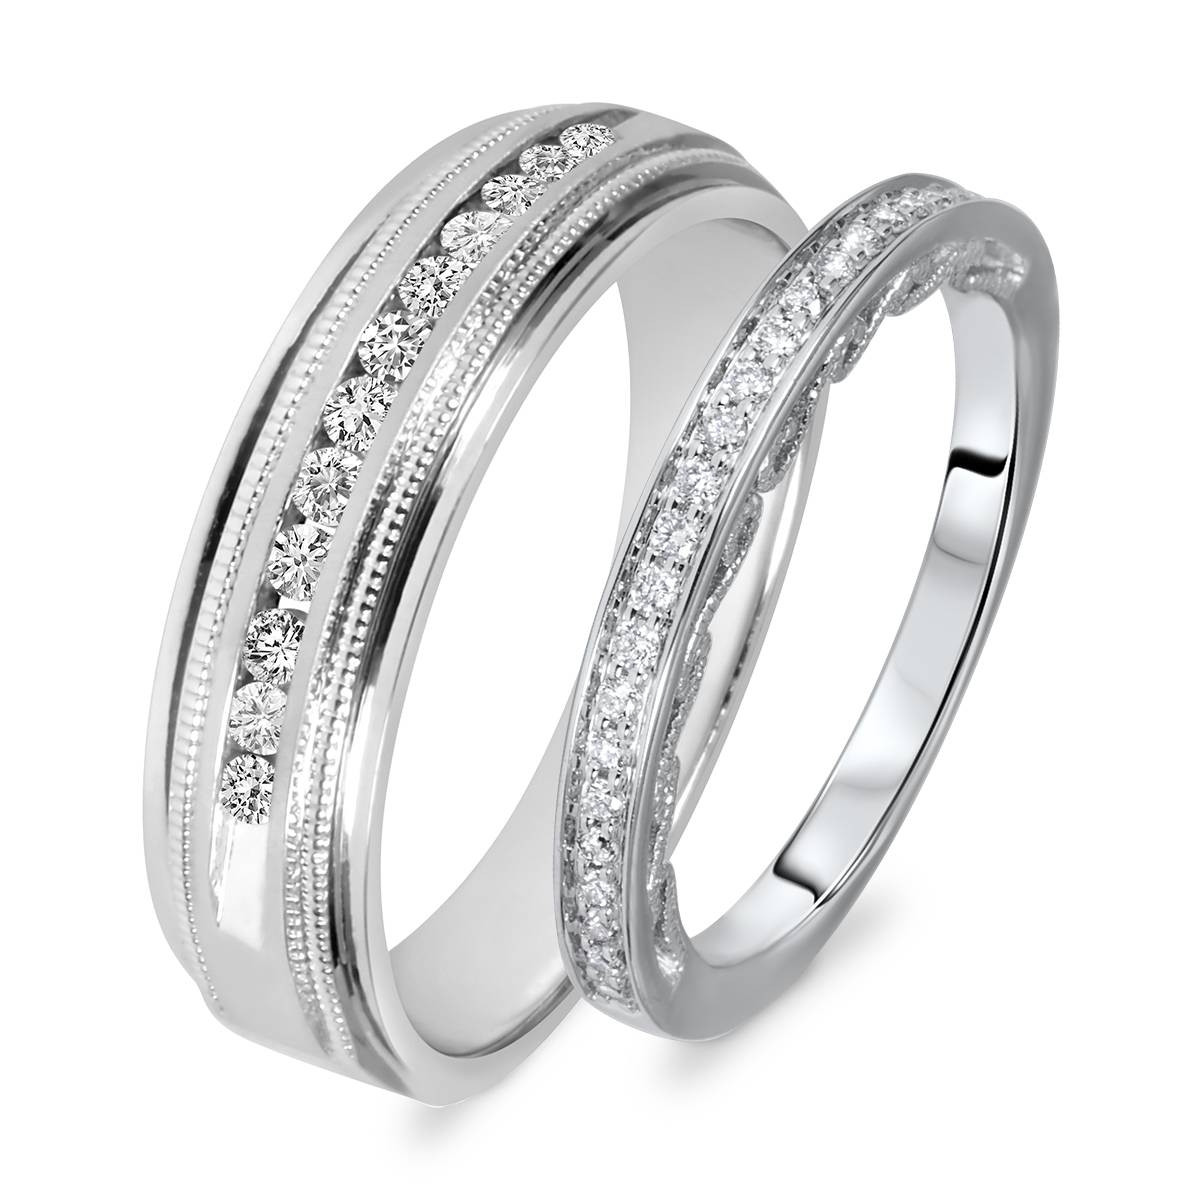 His And Hers Wedding Band Sets
 15 Inspirations of Cheap Wedding Bands Sets His And Hers